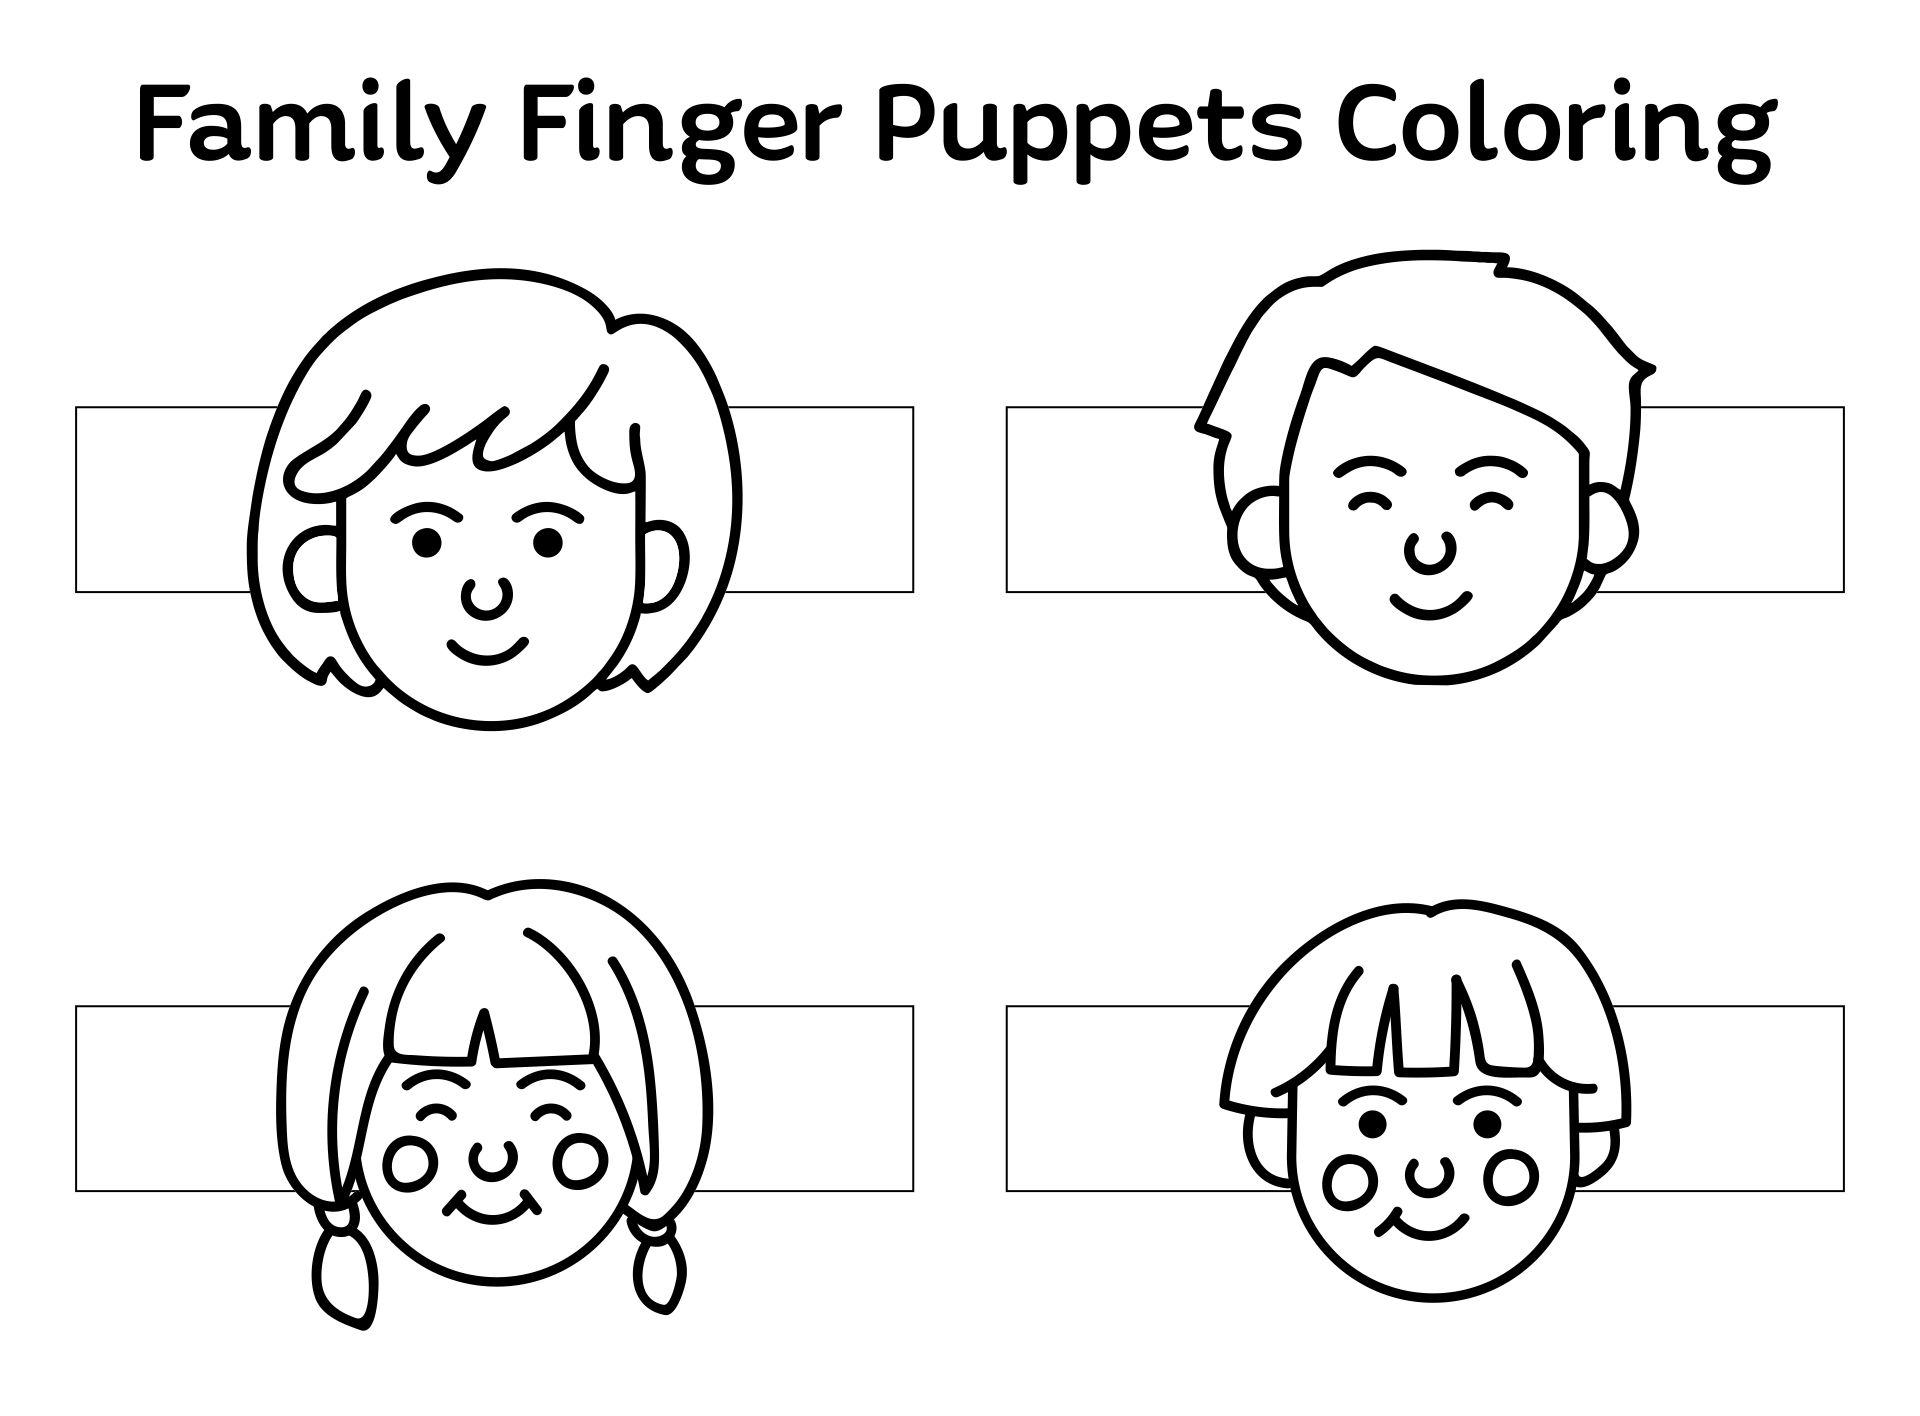 Printable Family Finger Puppets Coloring Pages